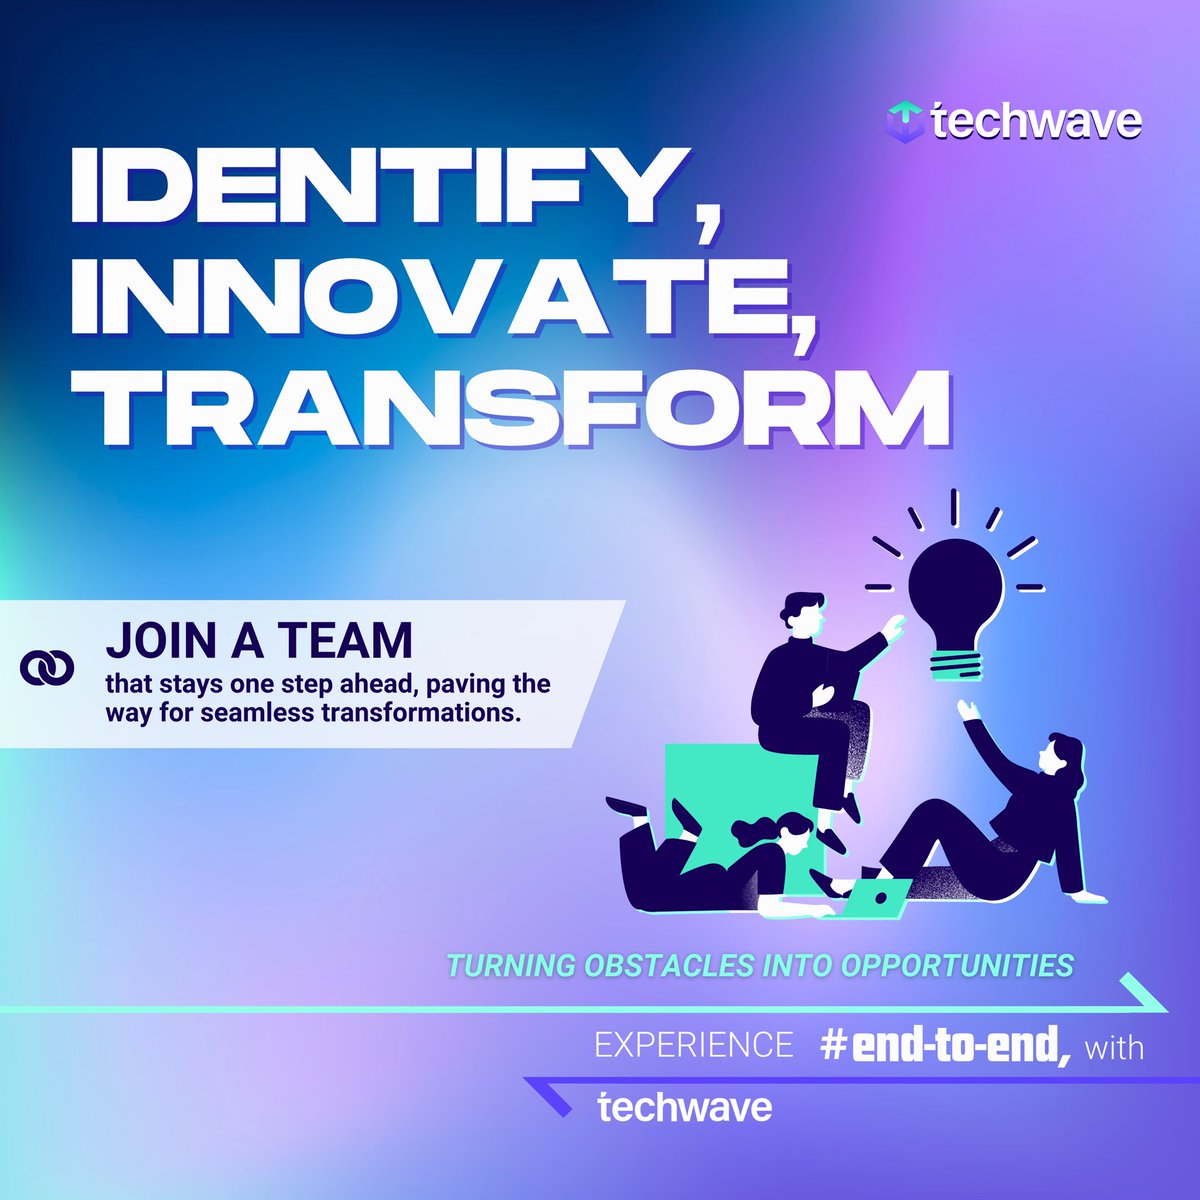 1.     Make a difference with us at Techwave, where proactive problem-solving is ingrained in our end-to-end approach. Be part of a team that analyzes challenges, offering seamless solutions from start to finish. Click here to know more: techwave.net #techwave